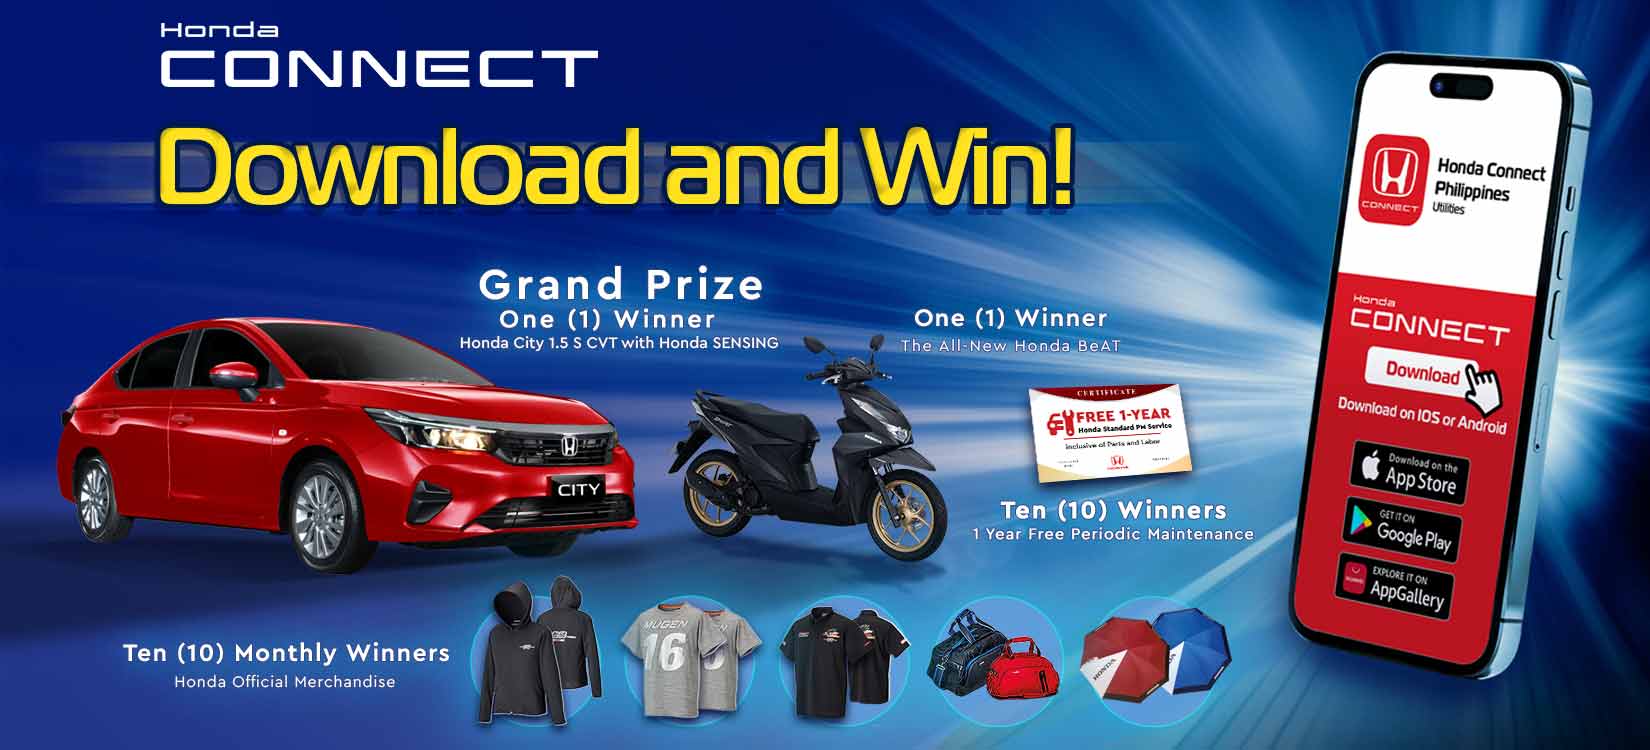 Download the Honda CONNECT and win a New Honda City!